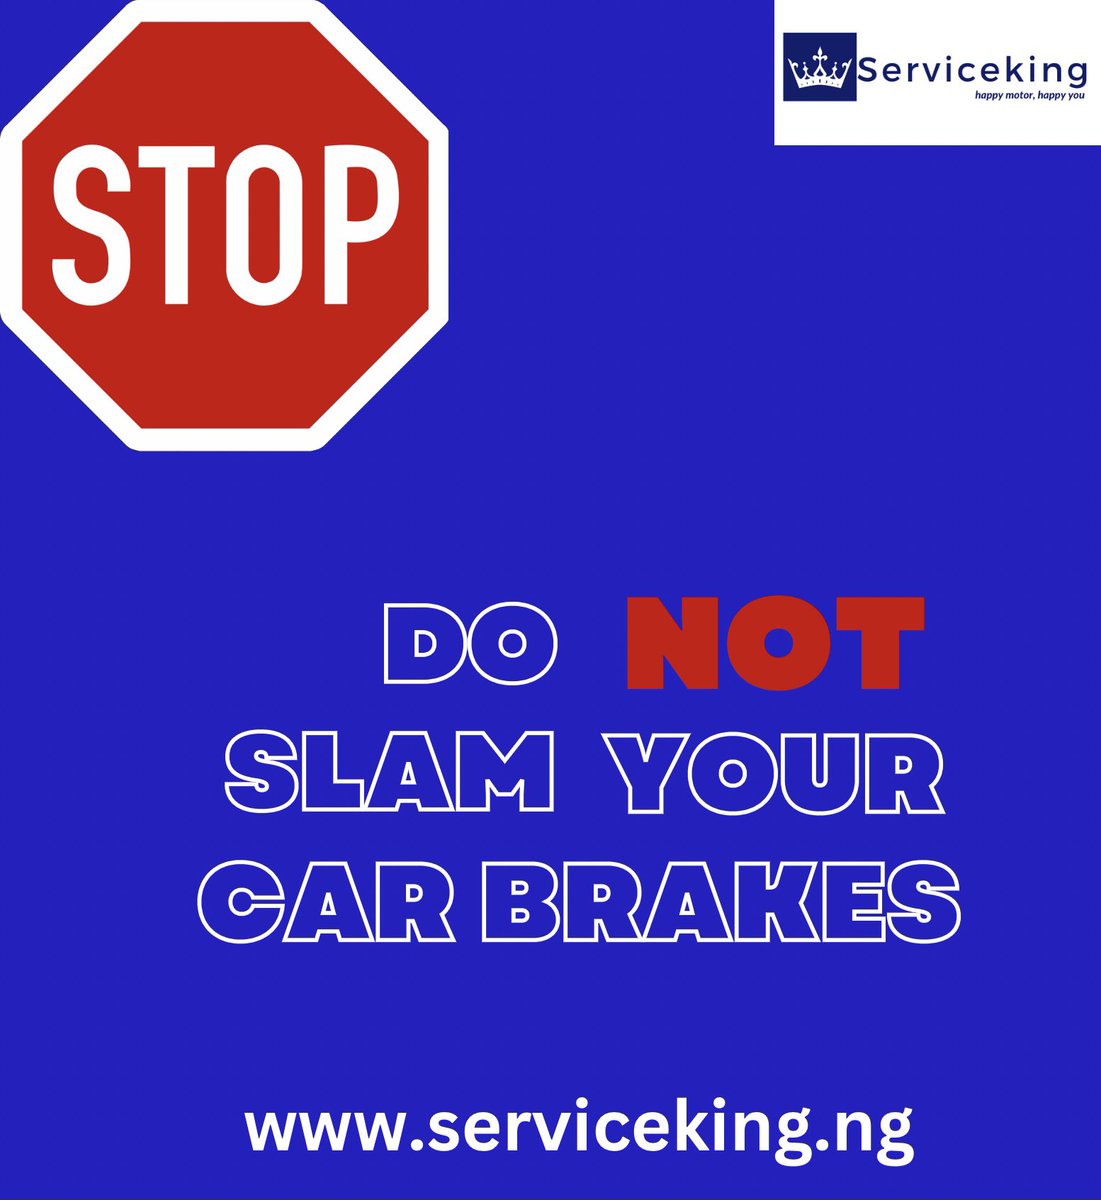 Stop slamming your car brakes every time. Slamming car brakes can affect the car brakes and also compromise your safety.

#tuesday #tuesdaytips #tuesdaytip #tipstuesday #viraltips #cartips #cartip #automechanic #ibadanmechanic #viral #trending #servicekingnigeria #serviceking